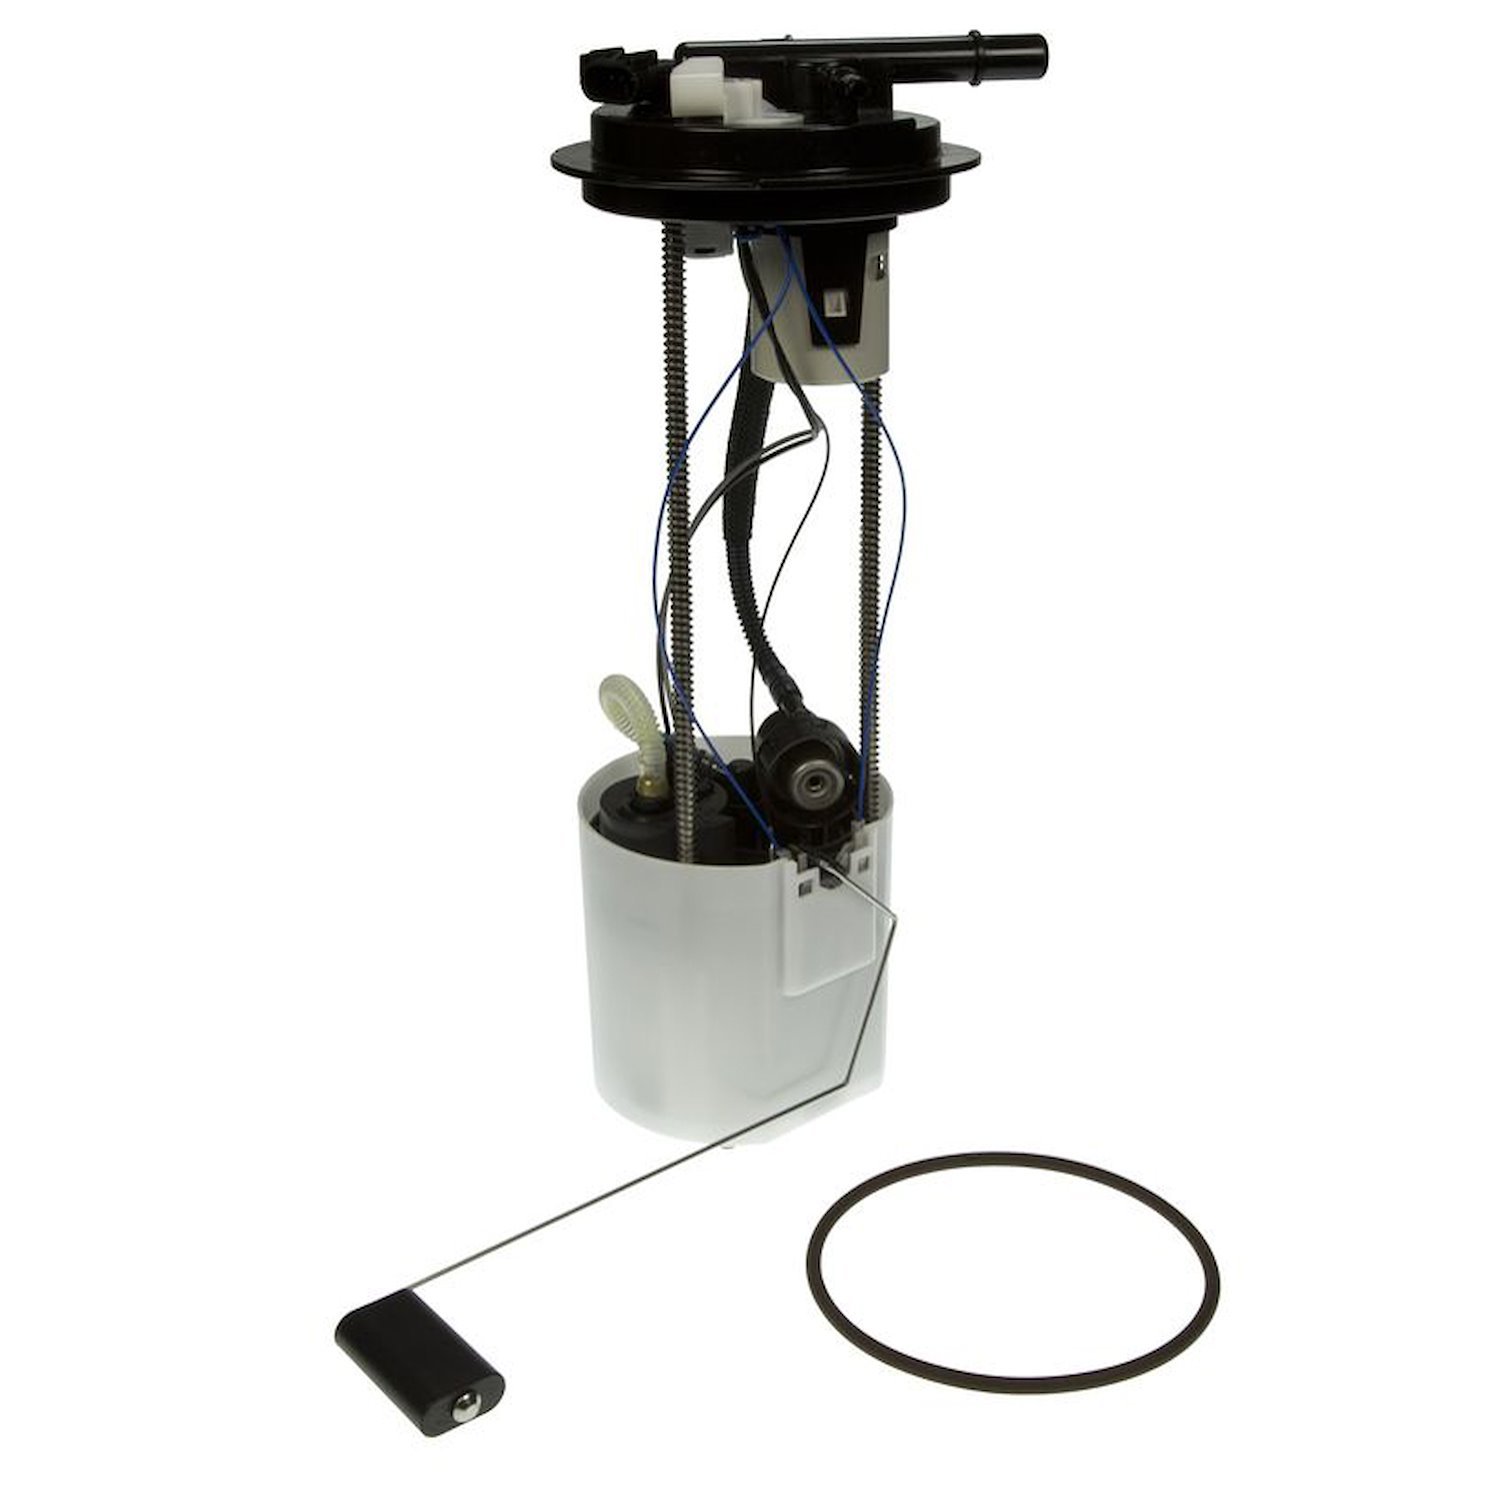 OE GM Replacement Electric Fuel Pump Module Assembly for 2009-2013 Chevy Silverado/GMC Sierra